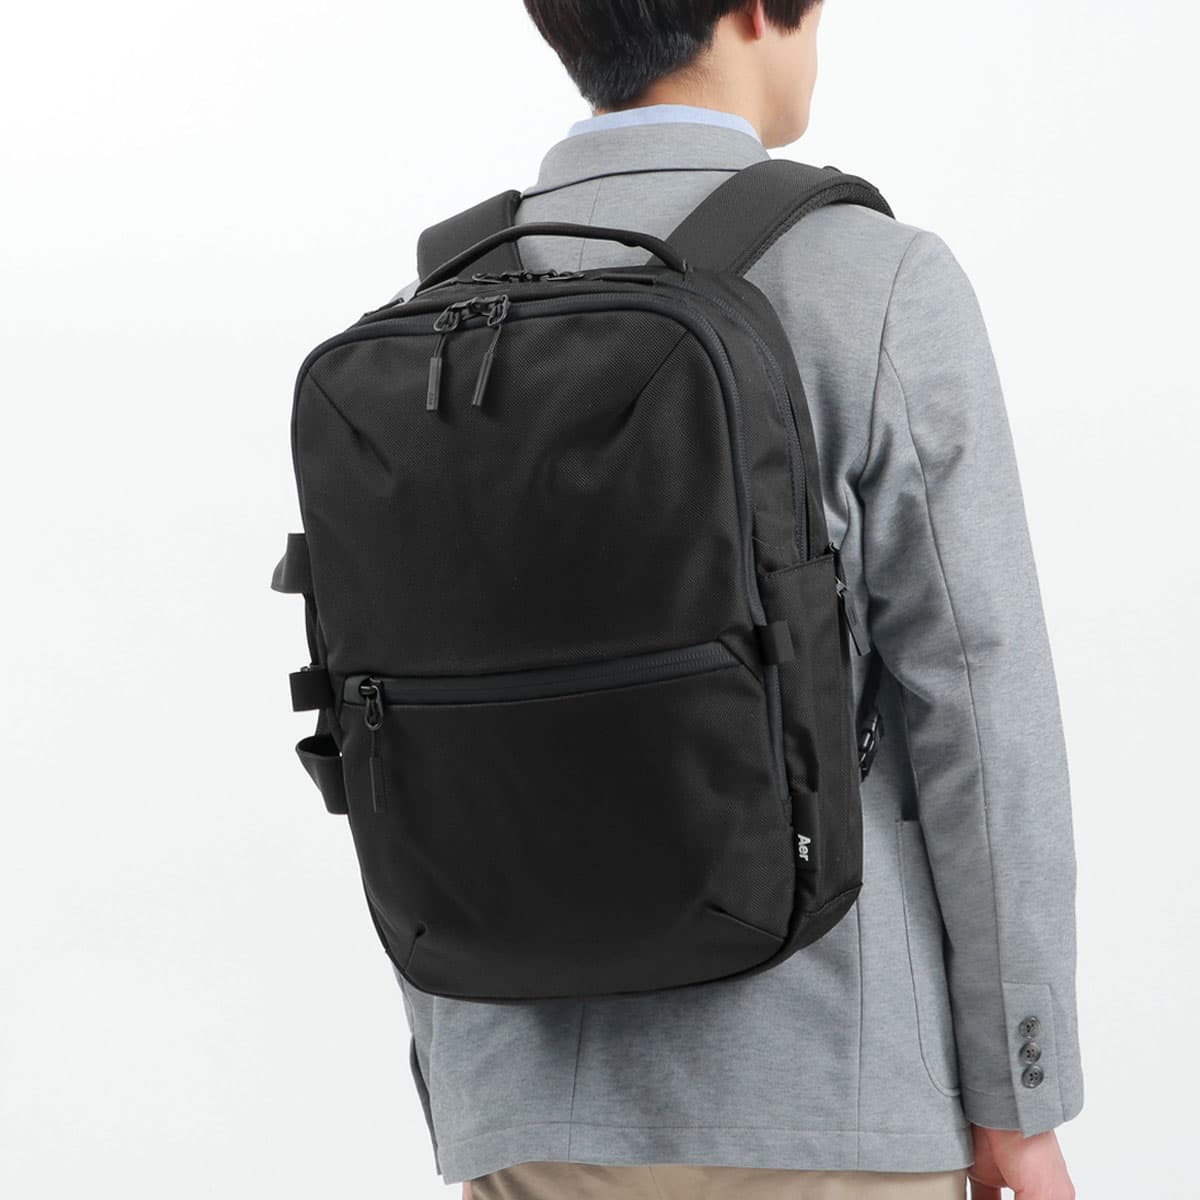 Aer エアー Travel Collection Flight Pack 3 3wayバックパック 20L